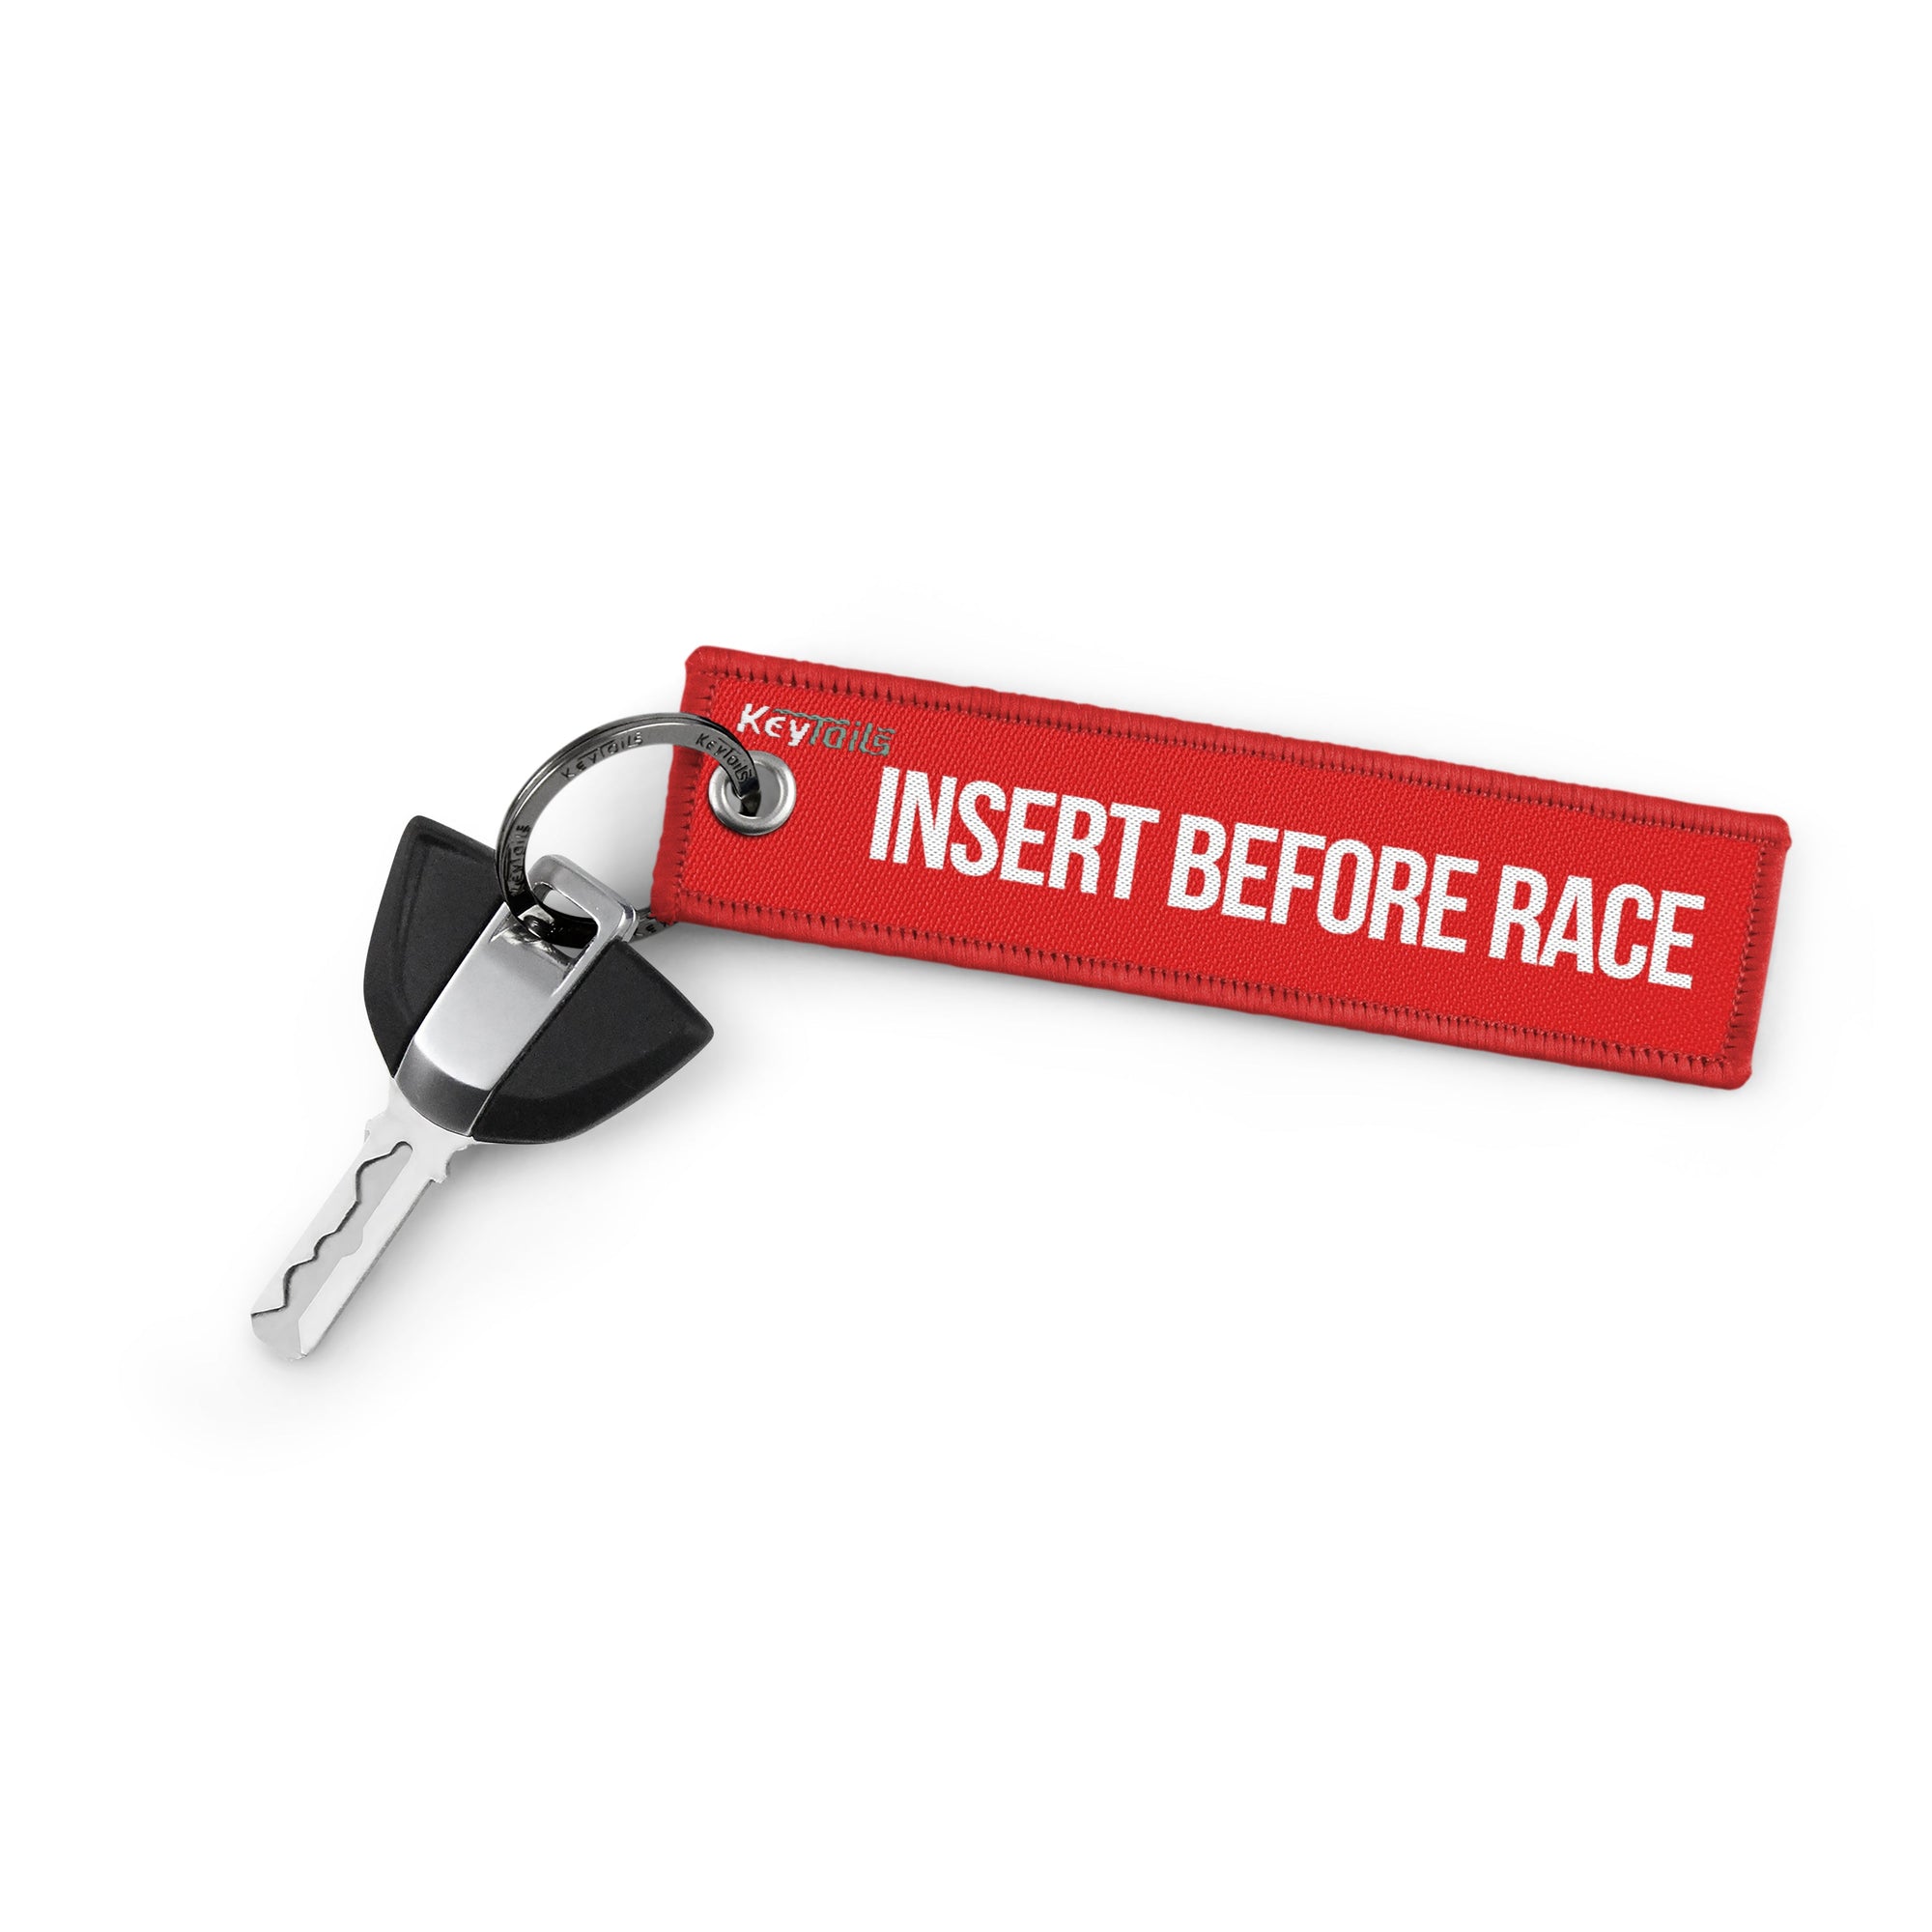 Insert Before Race Keychain, Key Tag - Insert Before Race